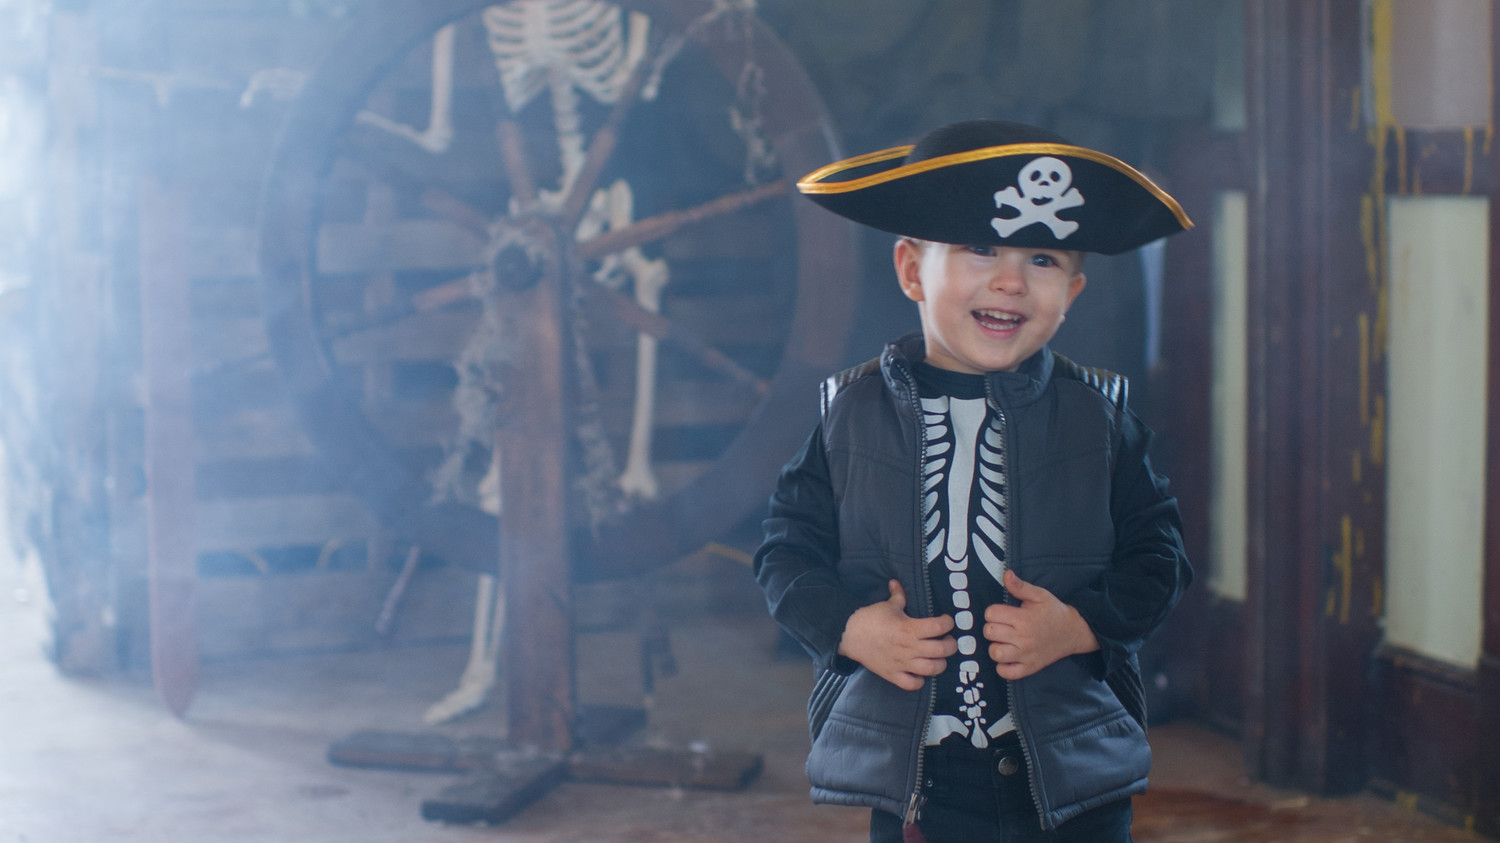 pirate birthday party